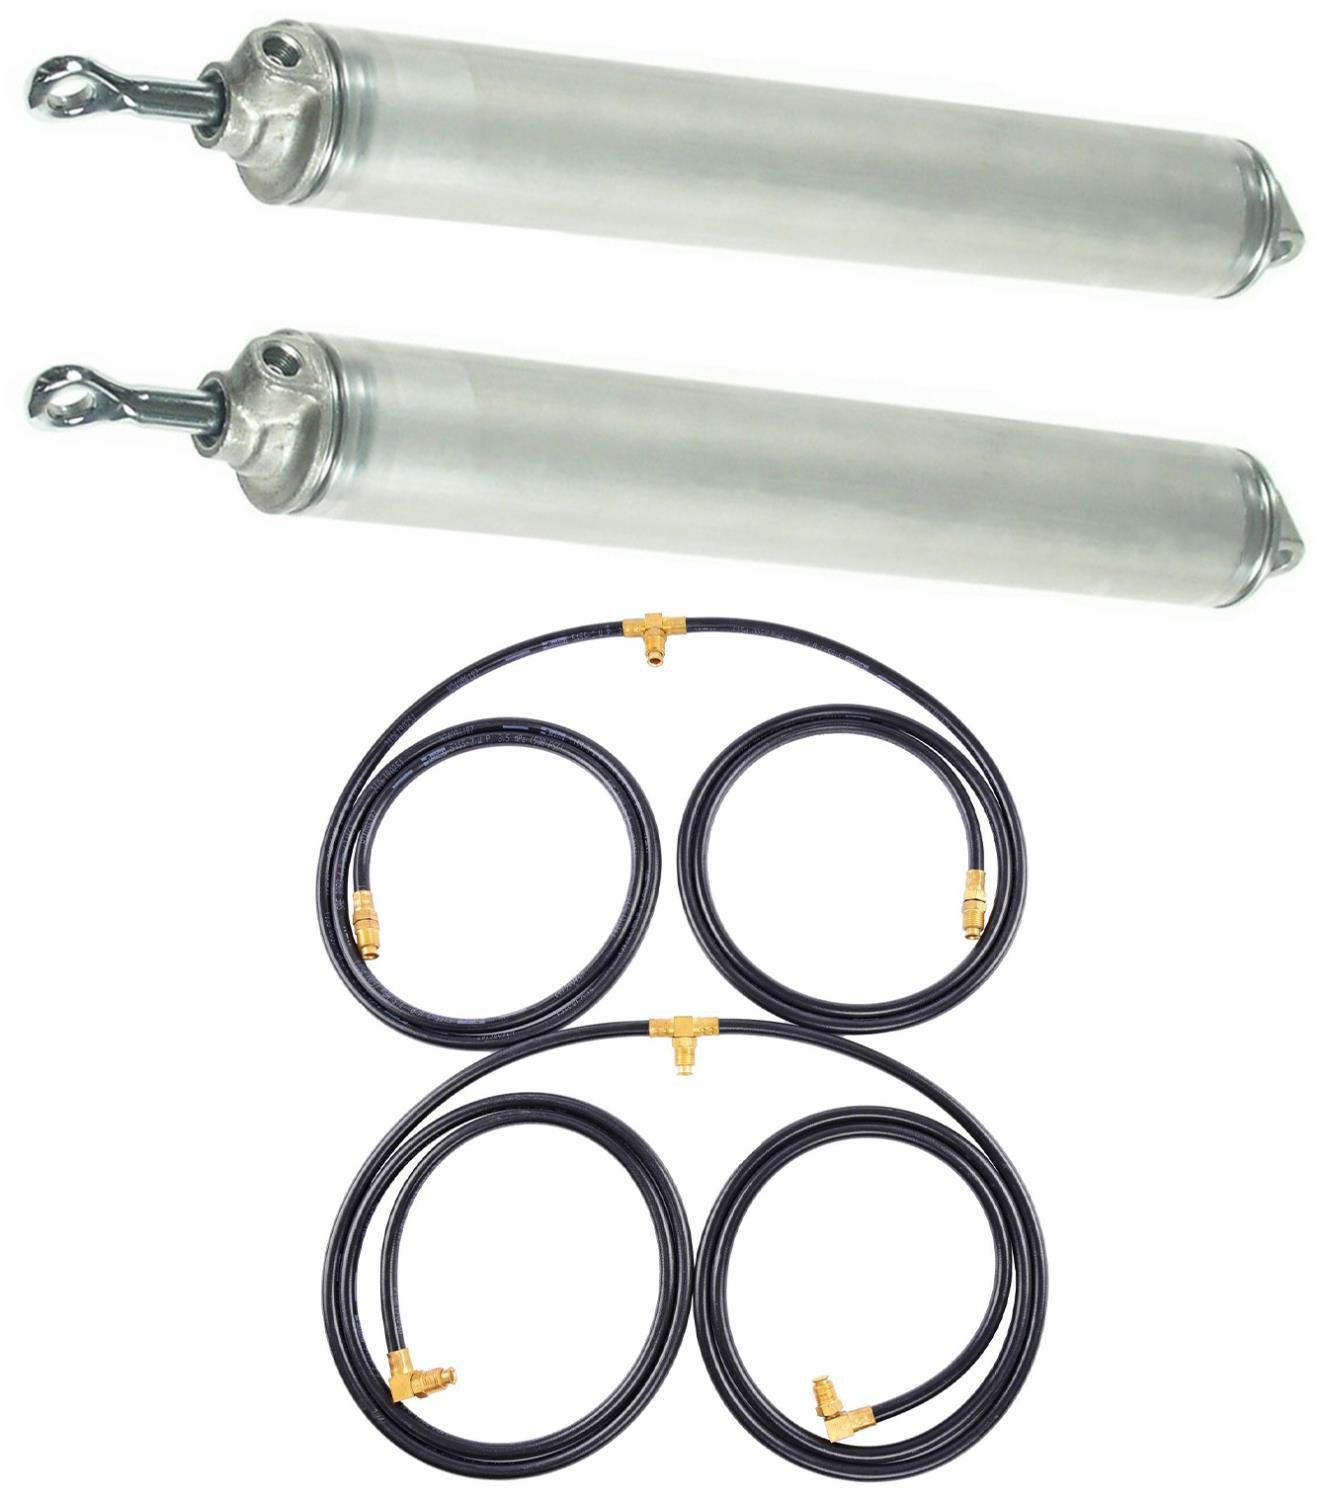 Convertible Top Cylinder & Hose Kit for 1958 Chevrolet, Pontiac Full-Size Convertibles [Sold as a Kit]